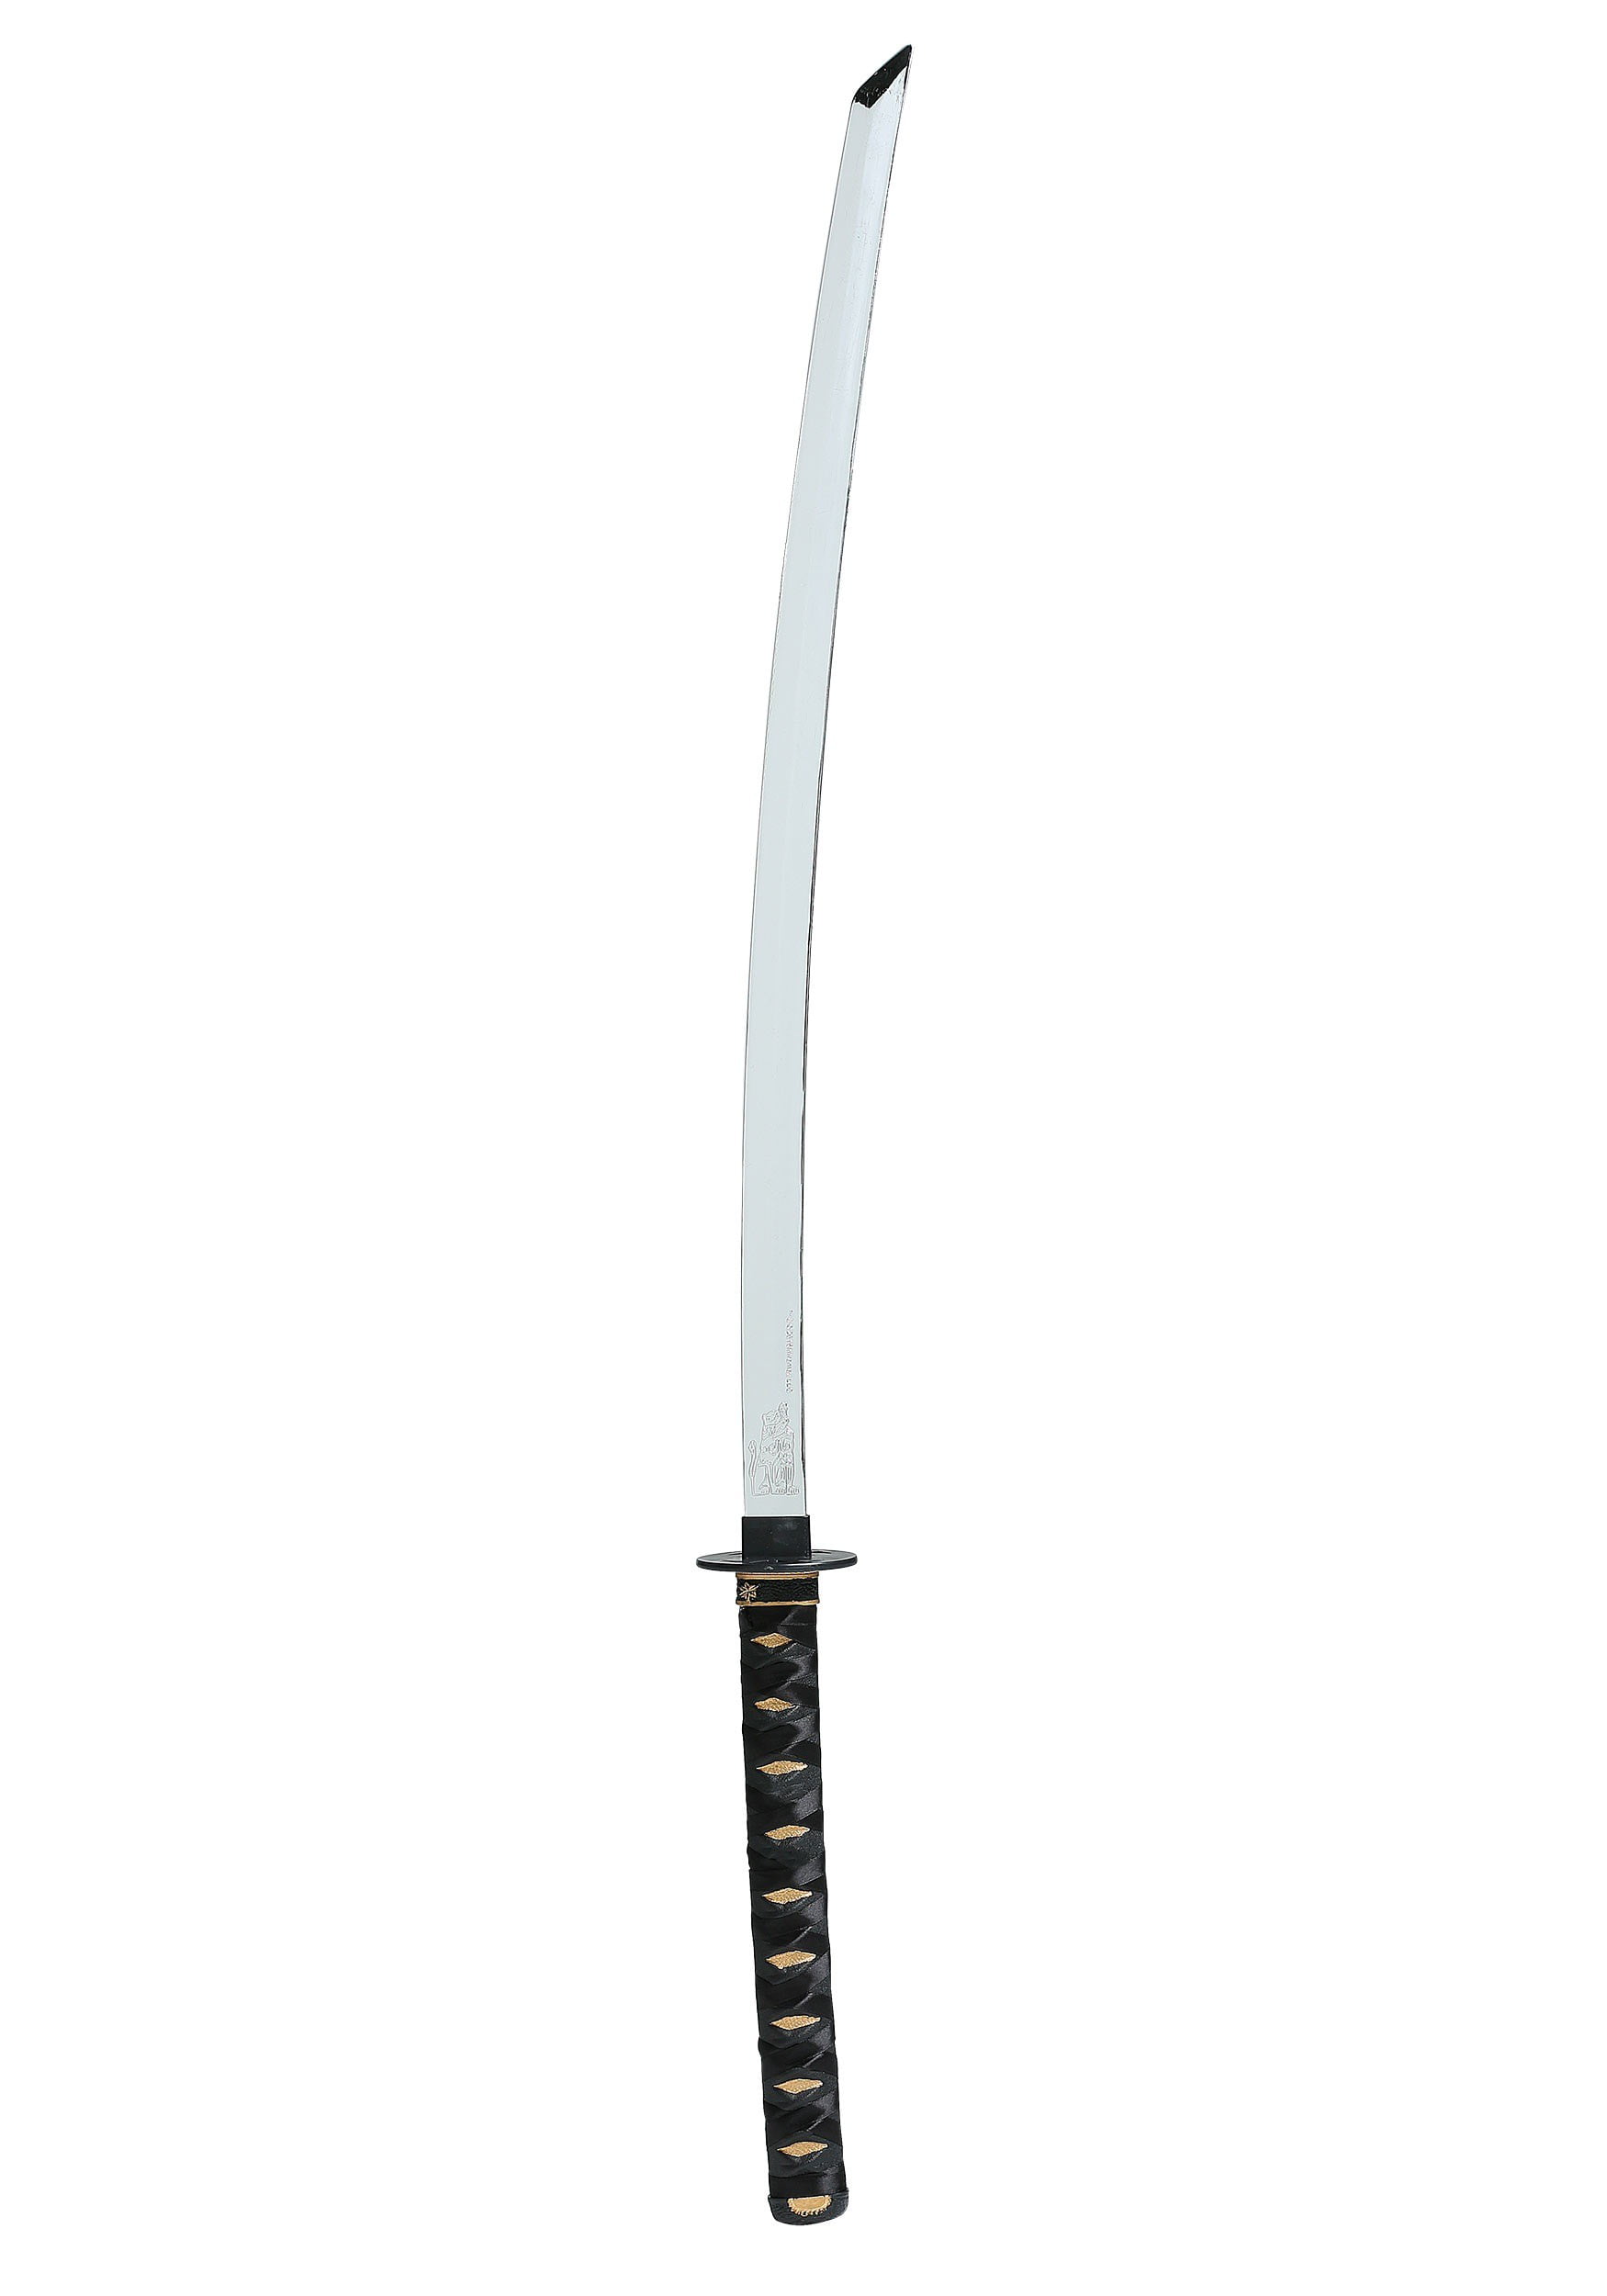 Hattori sword real hanzo Most Expensive